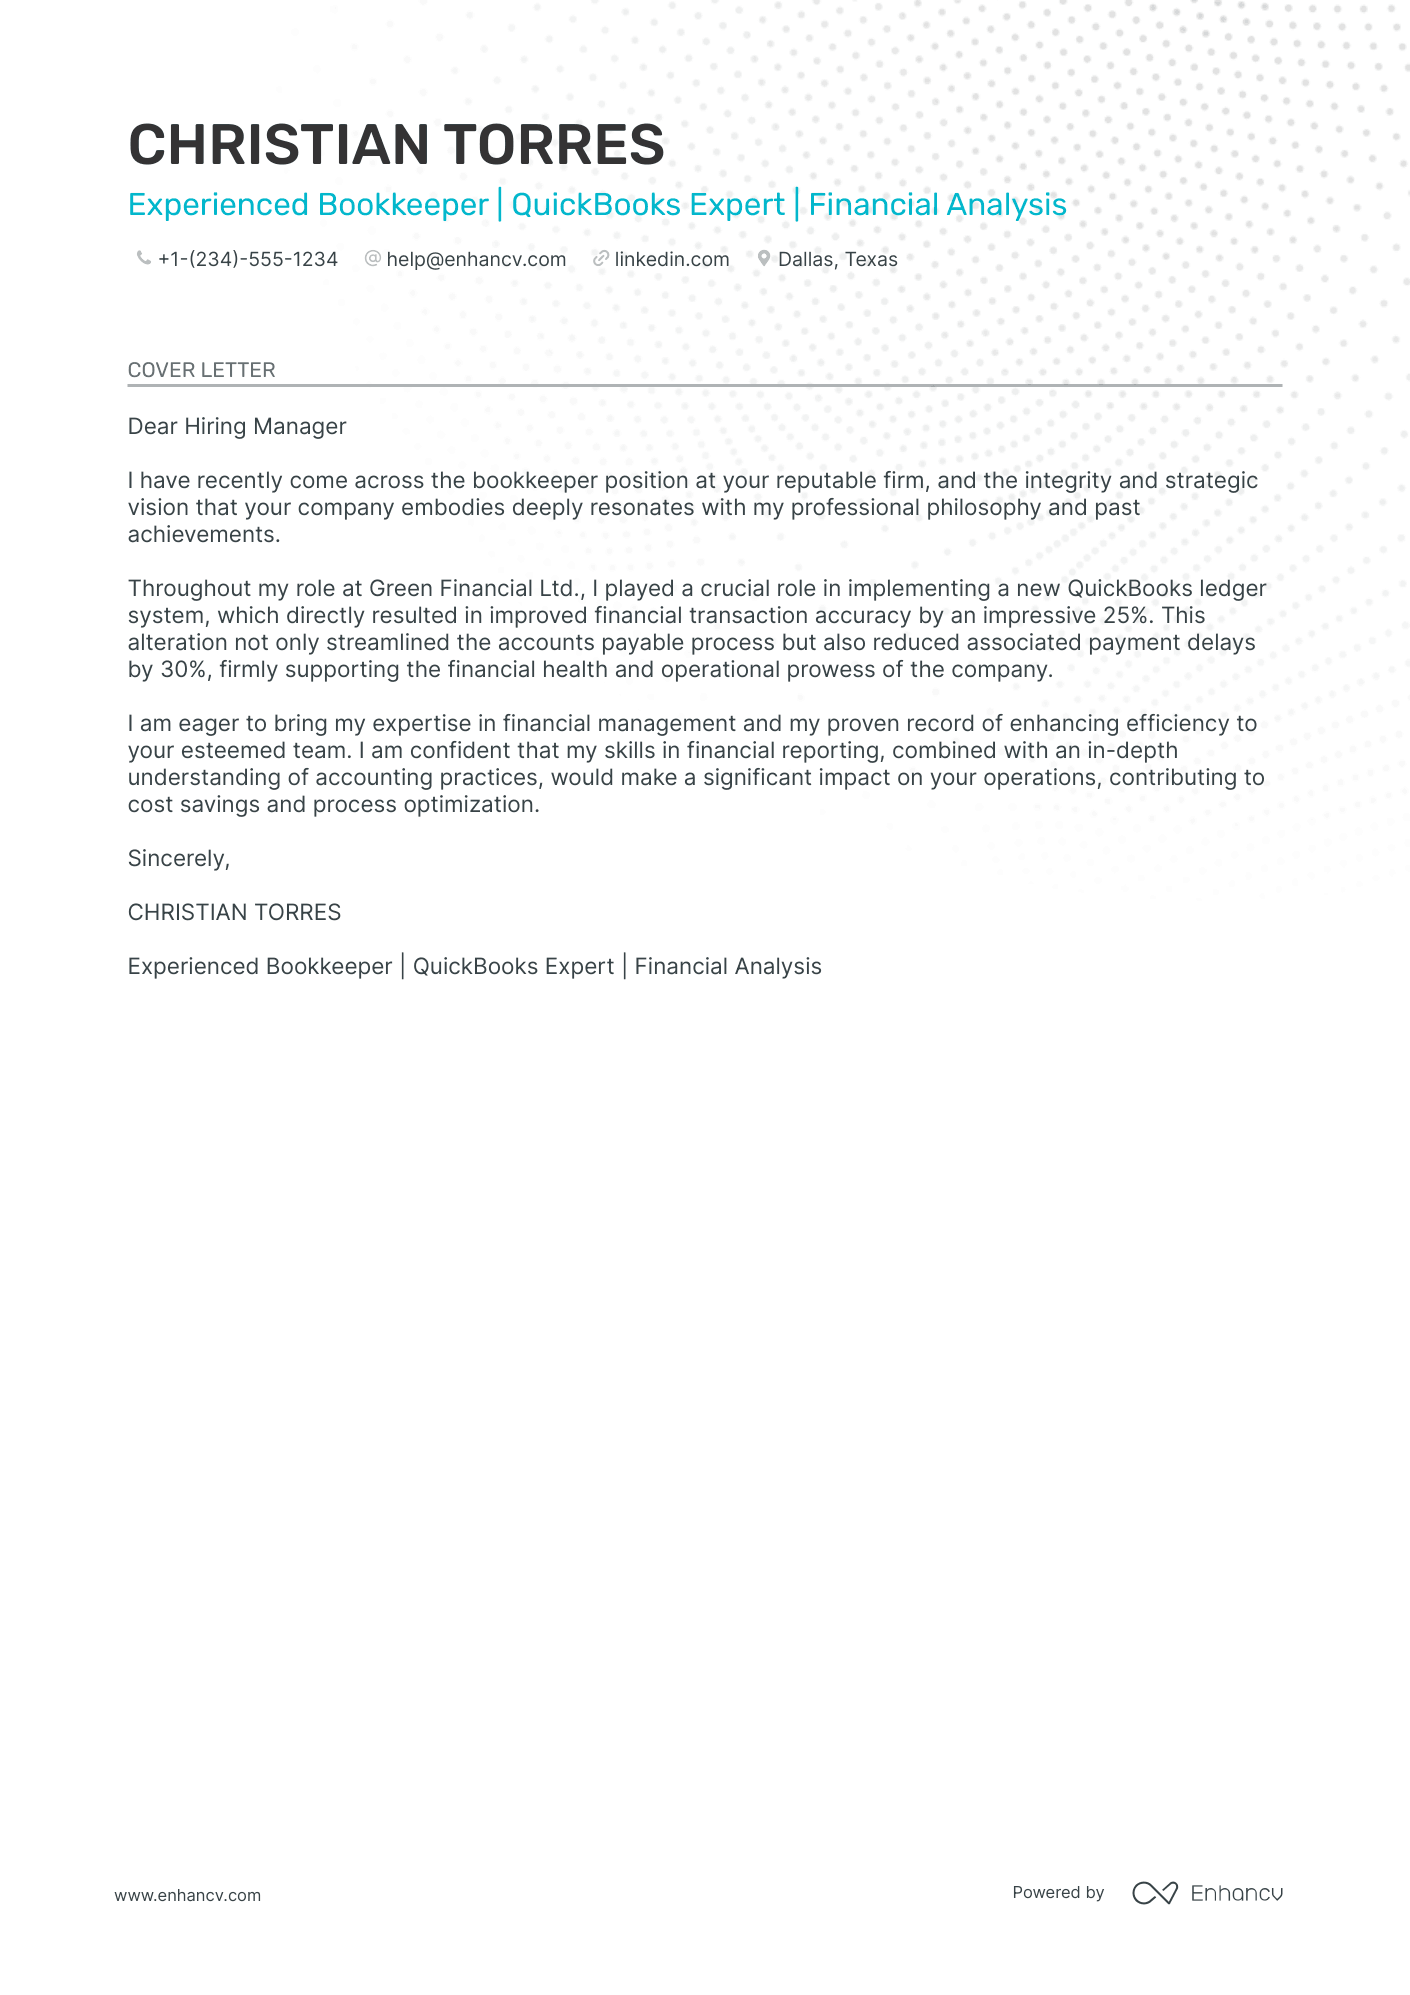 Bookkeeper cover letter